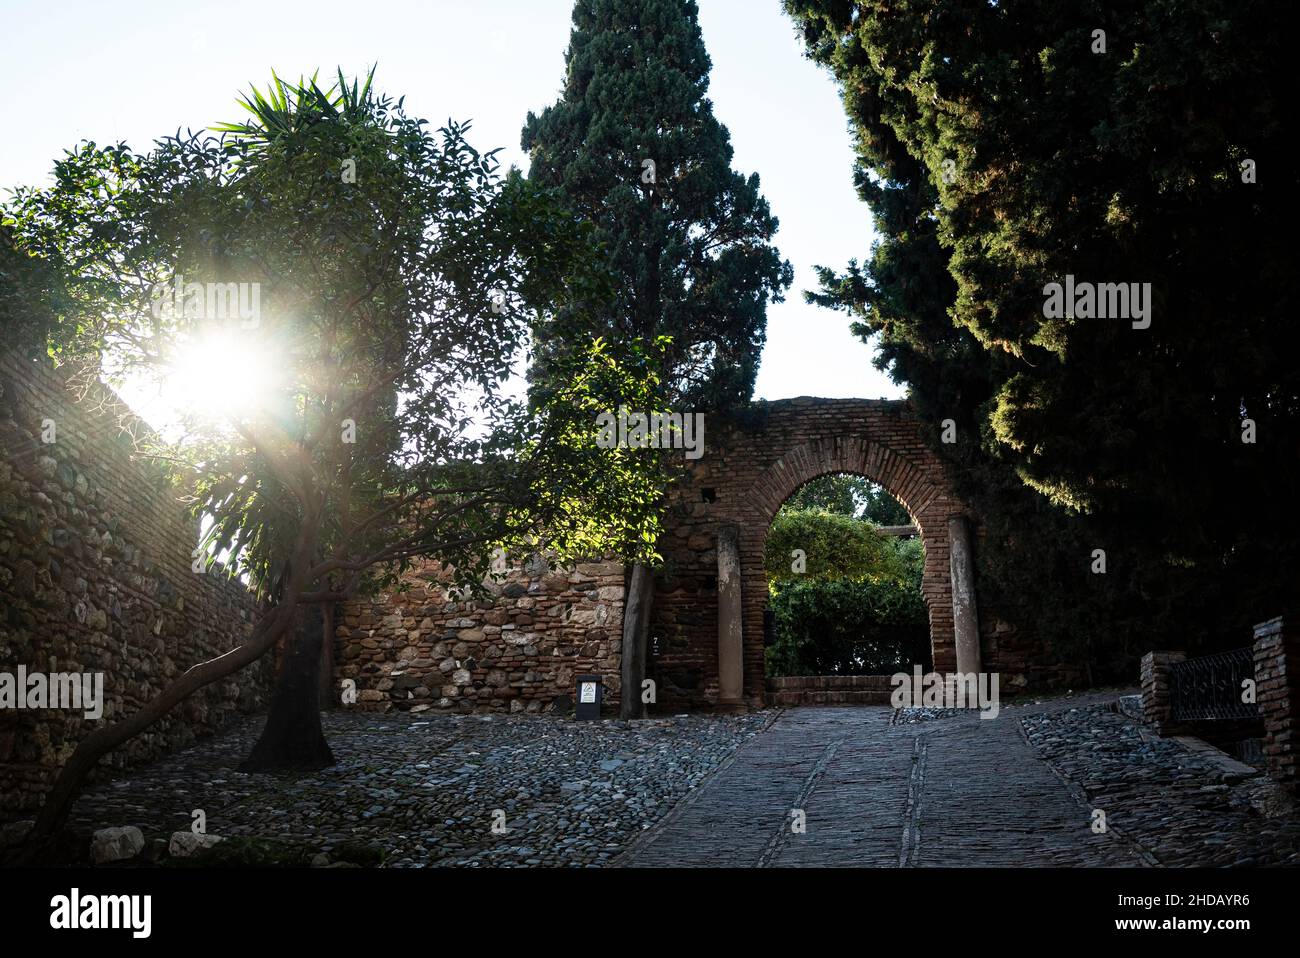 Alcazaba fortress in the city of Malaga, Andalusia. Spain Stock Photo